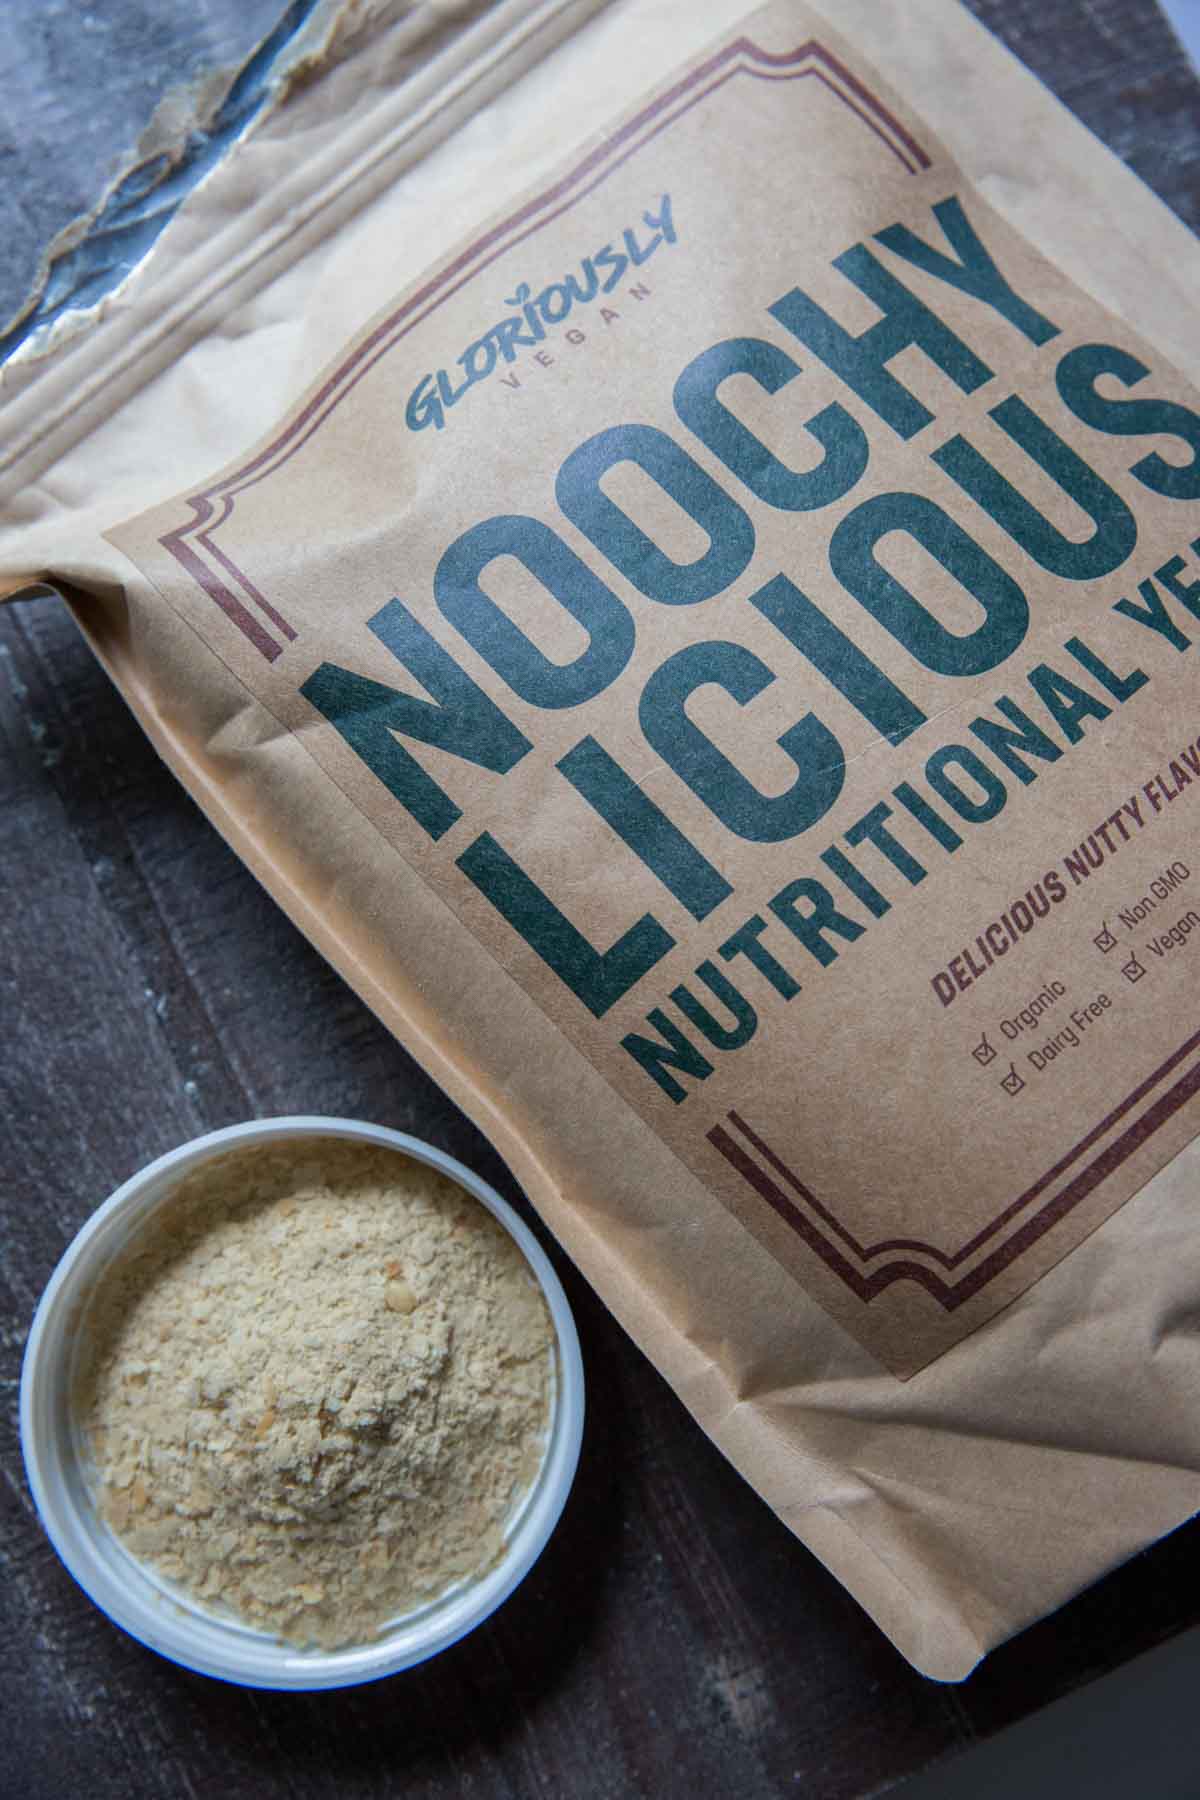 Noochy Licious nutritional yeast bags with some yeast flakes poured into a container